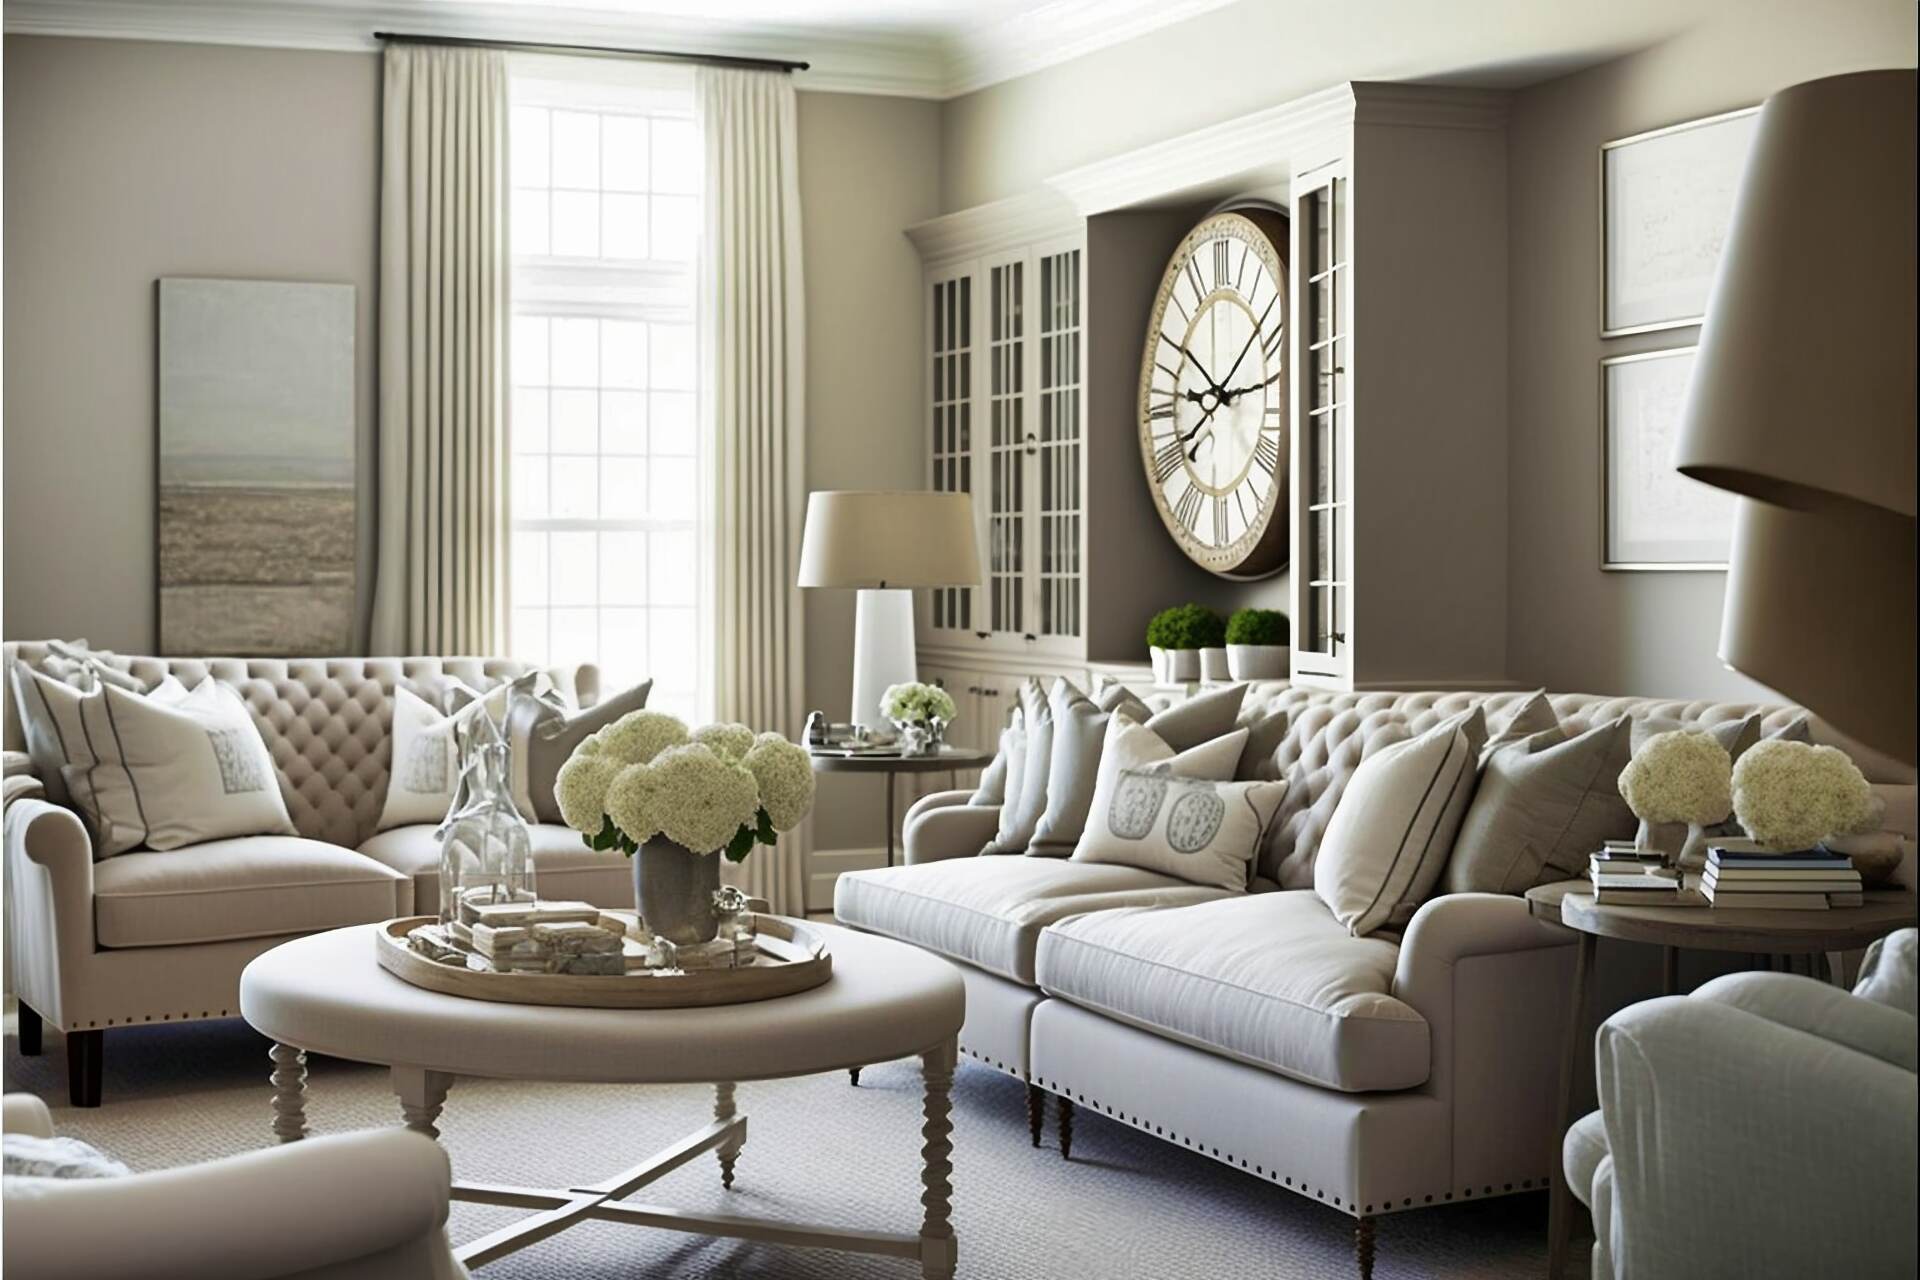 Contemporary Neutral Living Room - This Lovingly Layered Living Room Boasts A Range Of Chic, Neutral Tones, Creating A Grand And Elegant Atmosphere. An Impressive Light Gray Sofa Takes Center Stage While Two Modern Upholstered Armchairs Supply Added Seating. Scattered Books, A Woven Basket, And A Stately Clock Provide Added Detail While A Flat-Screen Tv Occupies The Wall To Provide Modern Convenience.